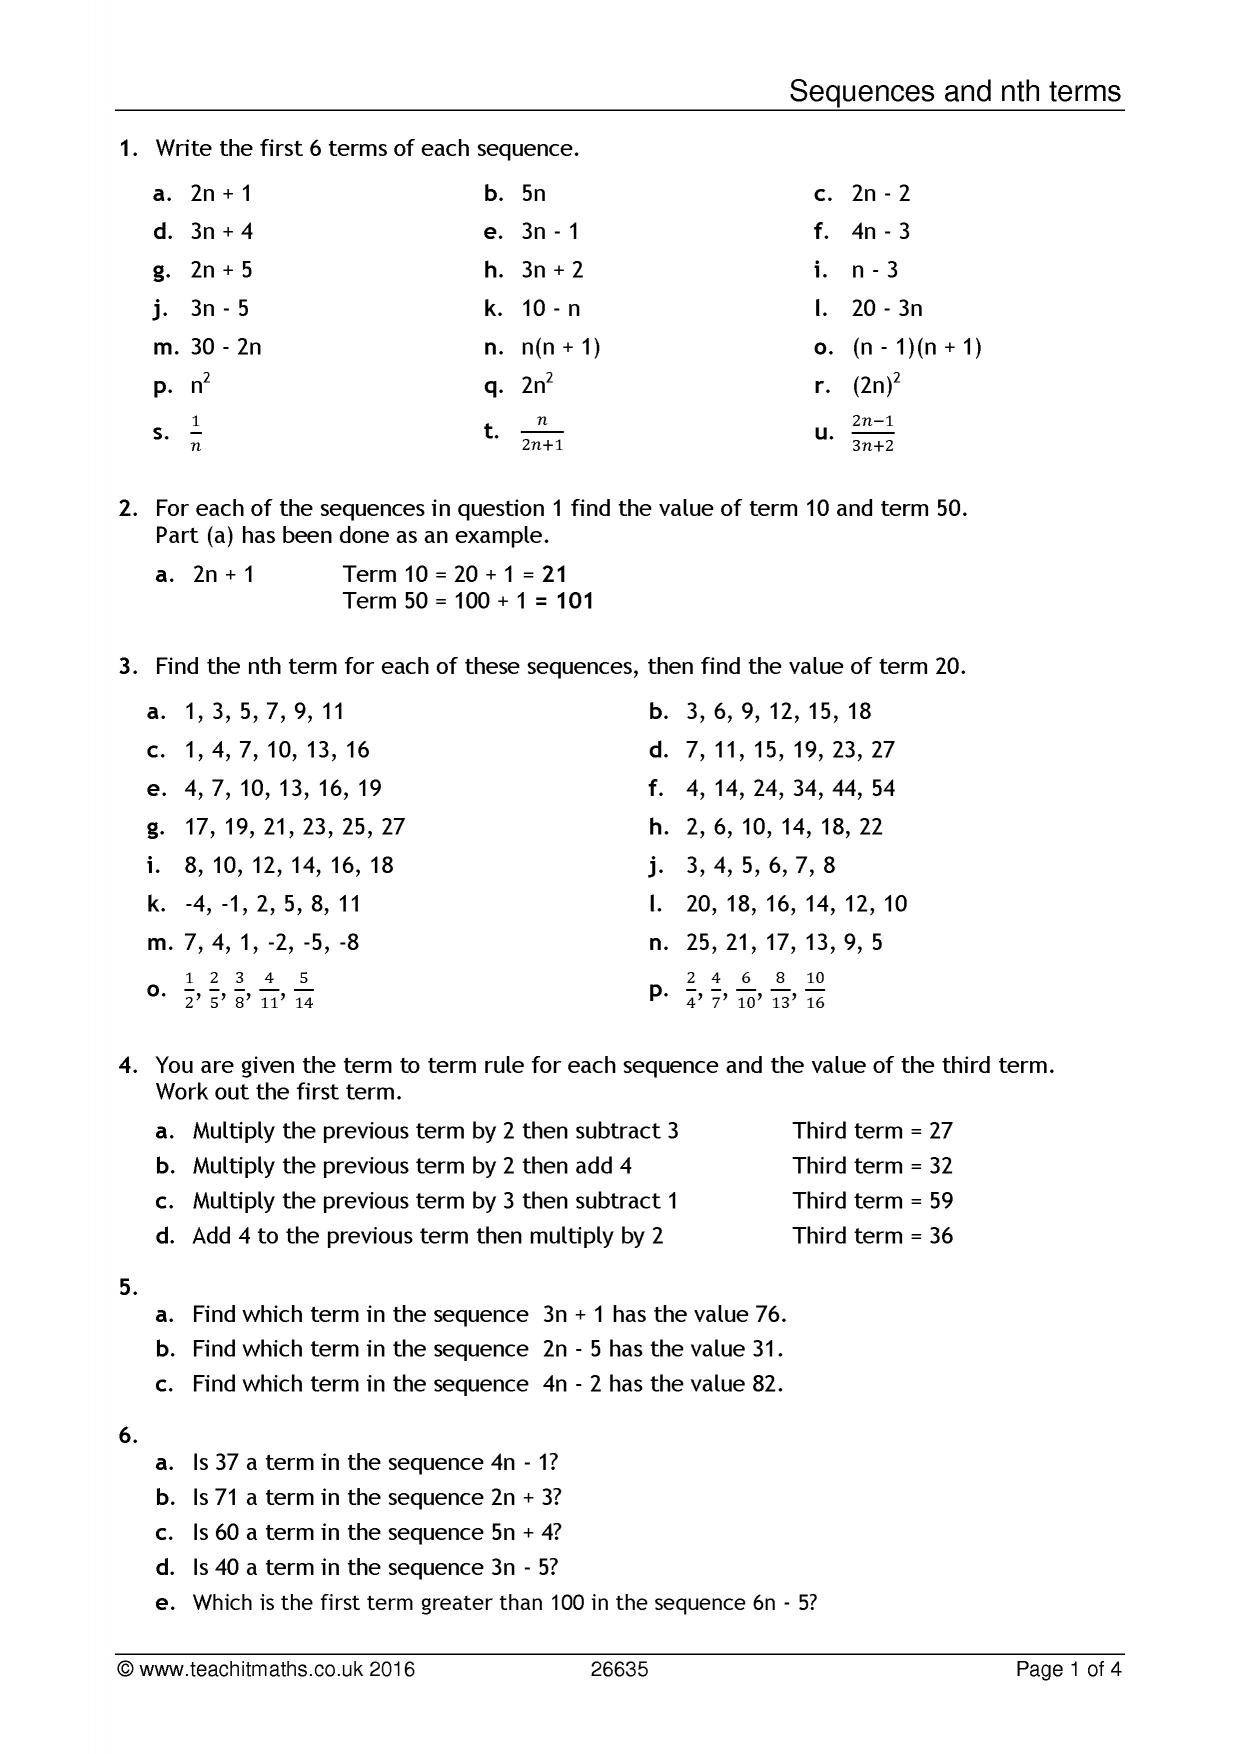 Arithmetic Sequence Worksheet Answers Sequences and Nth Terms Worksheet [pdf] Teachit Maths